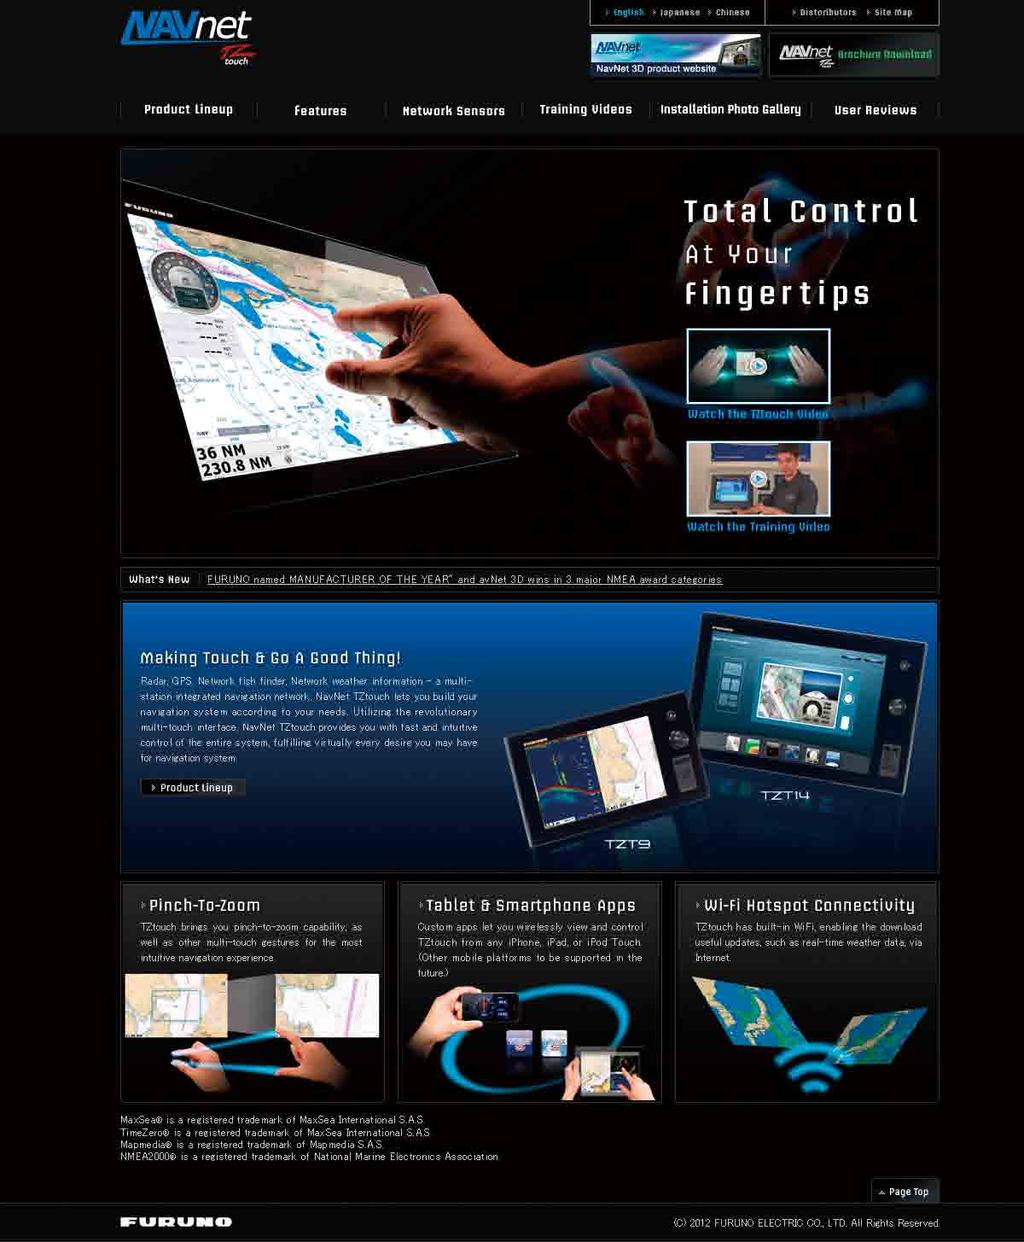 Whenever you require any information about NavNet TZtouch, just visit our web site (www.navnet.